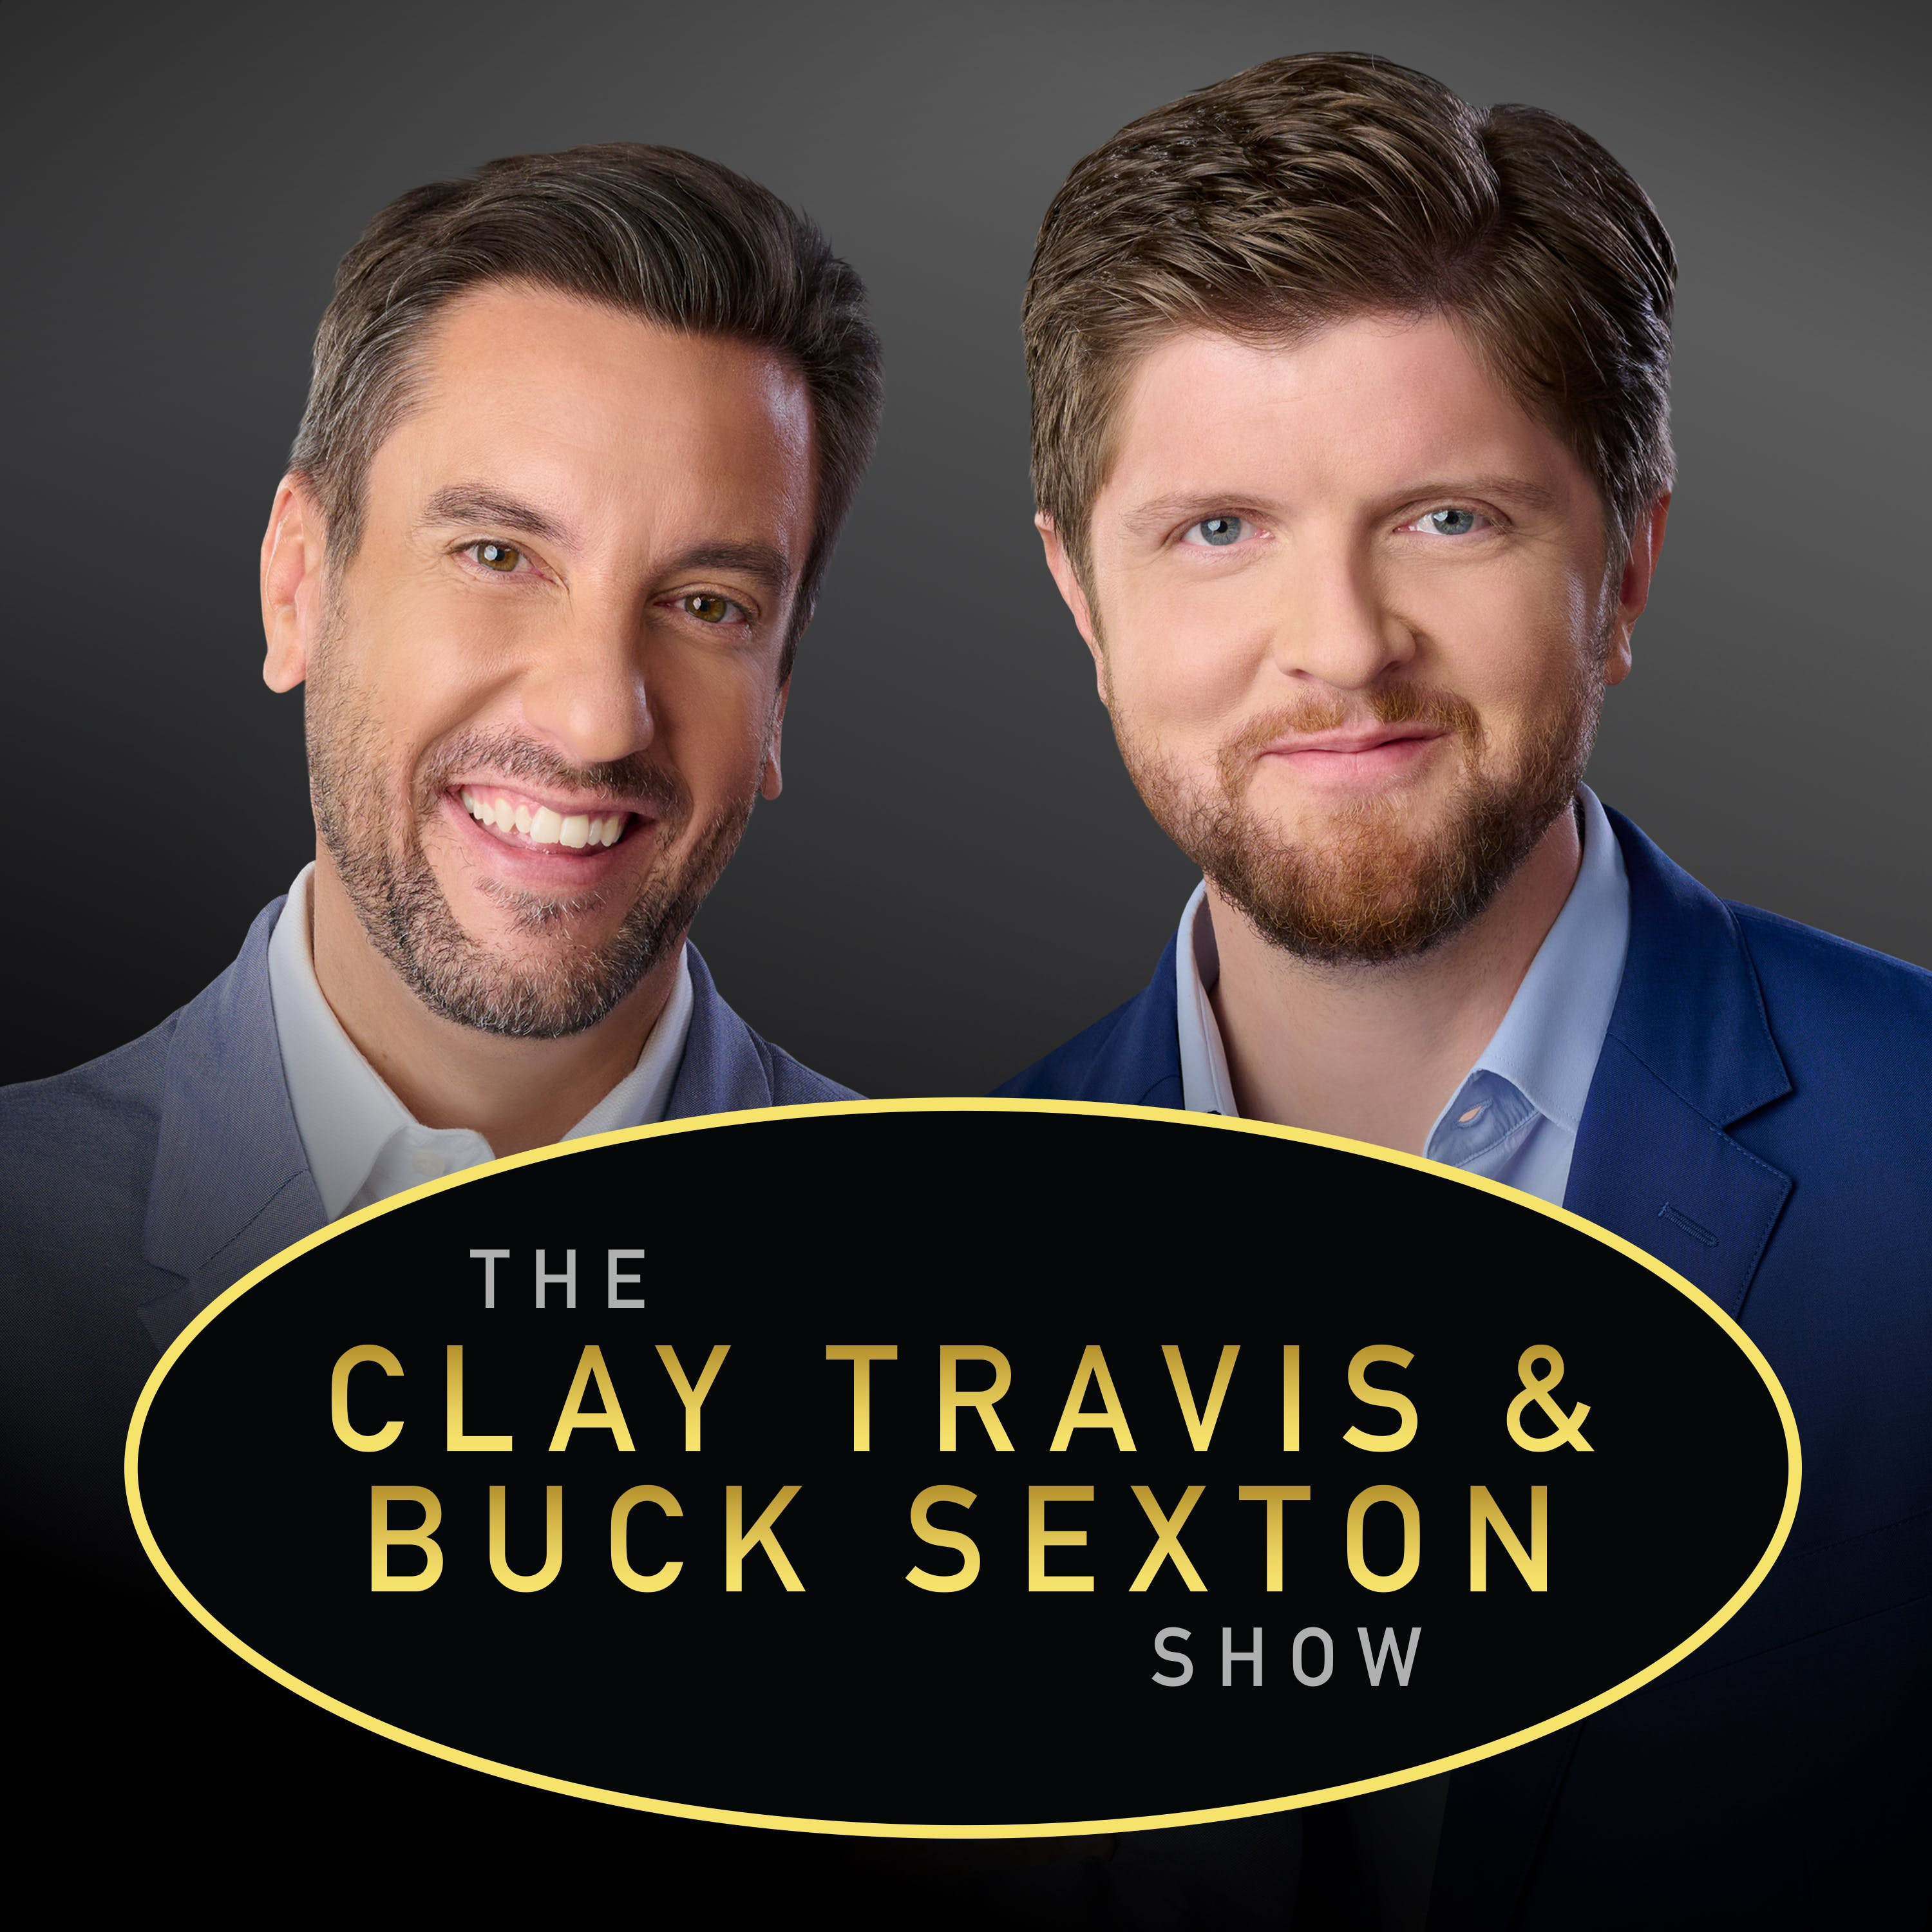 Clay Travis and Buck Sexton Show H1 – Sep 6 2021